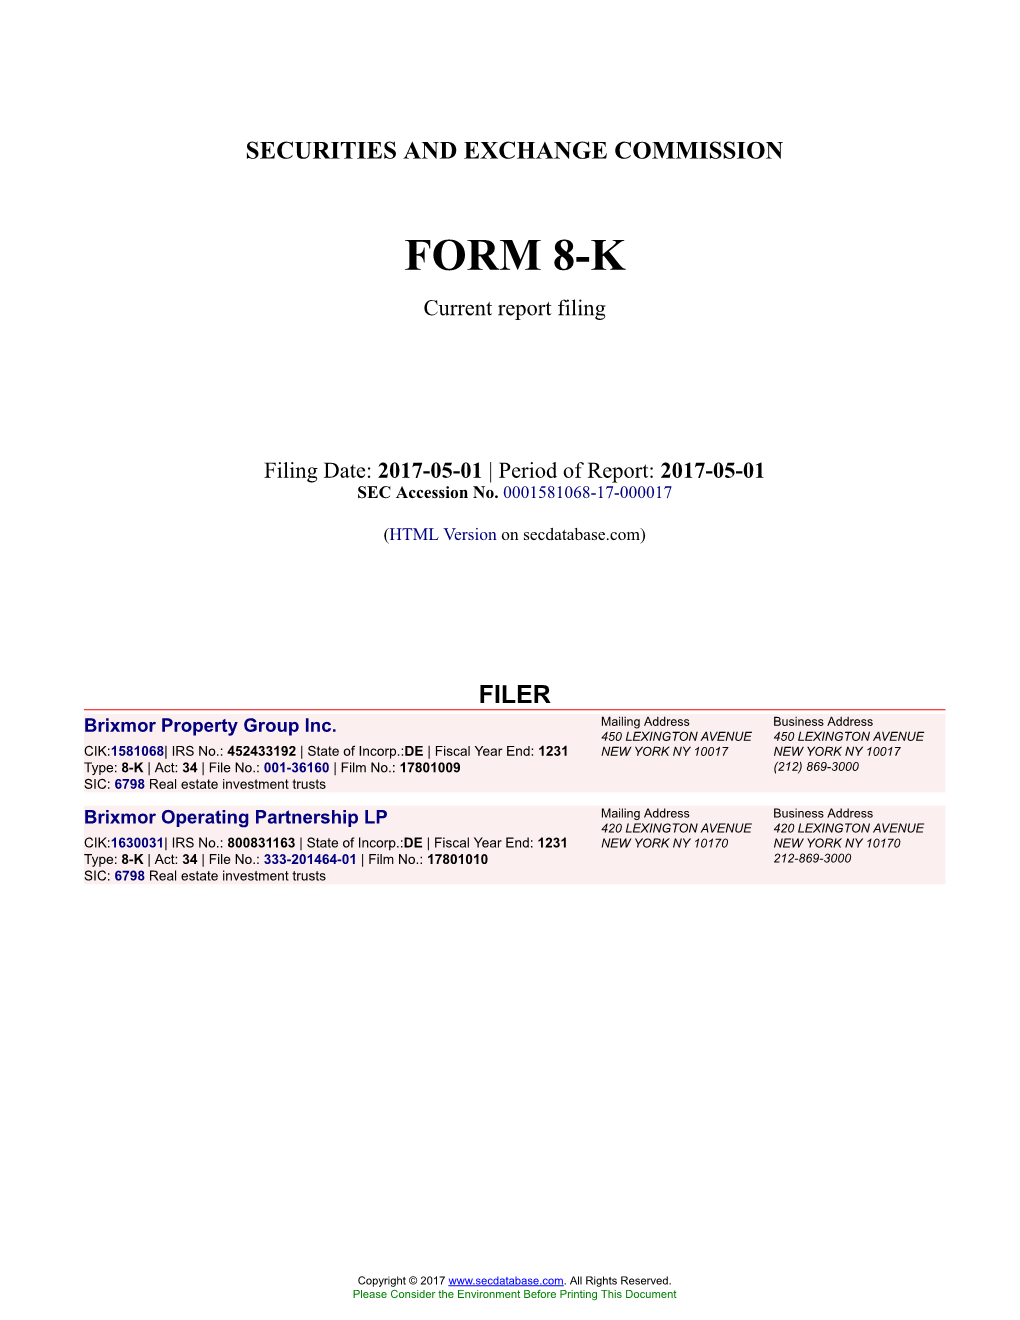 Brixmor Property Group Inc. Form 8-K Current Report Filed 2017-05-01